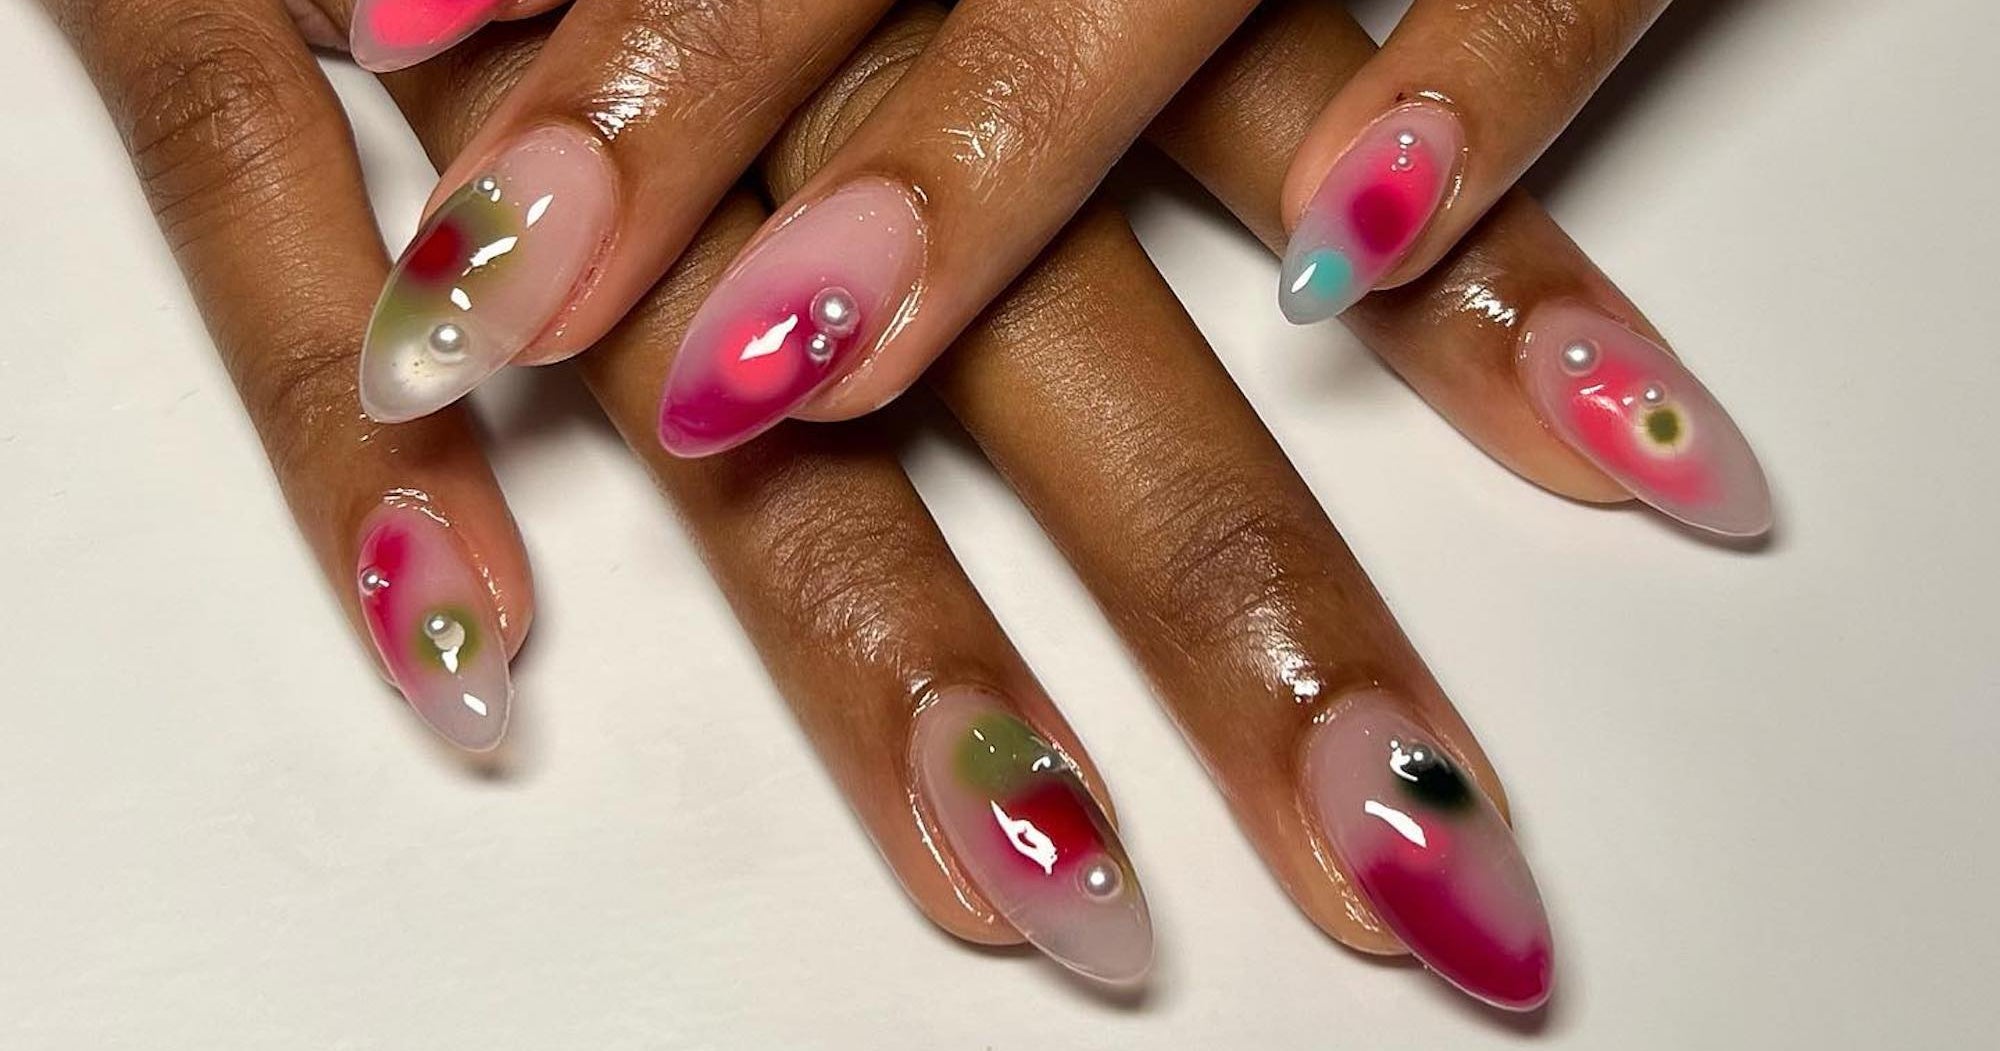 Blooming Gel Is The Nail Trend You’re About To See Everywhere